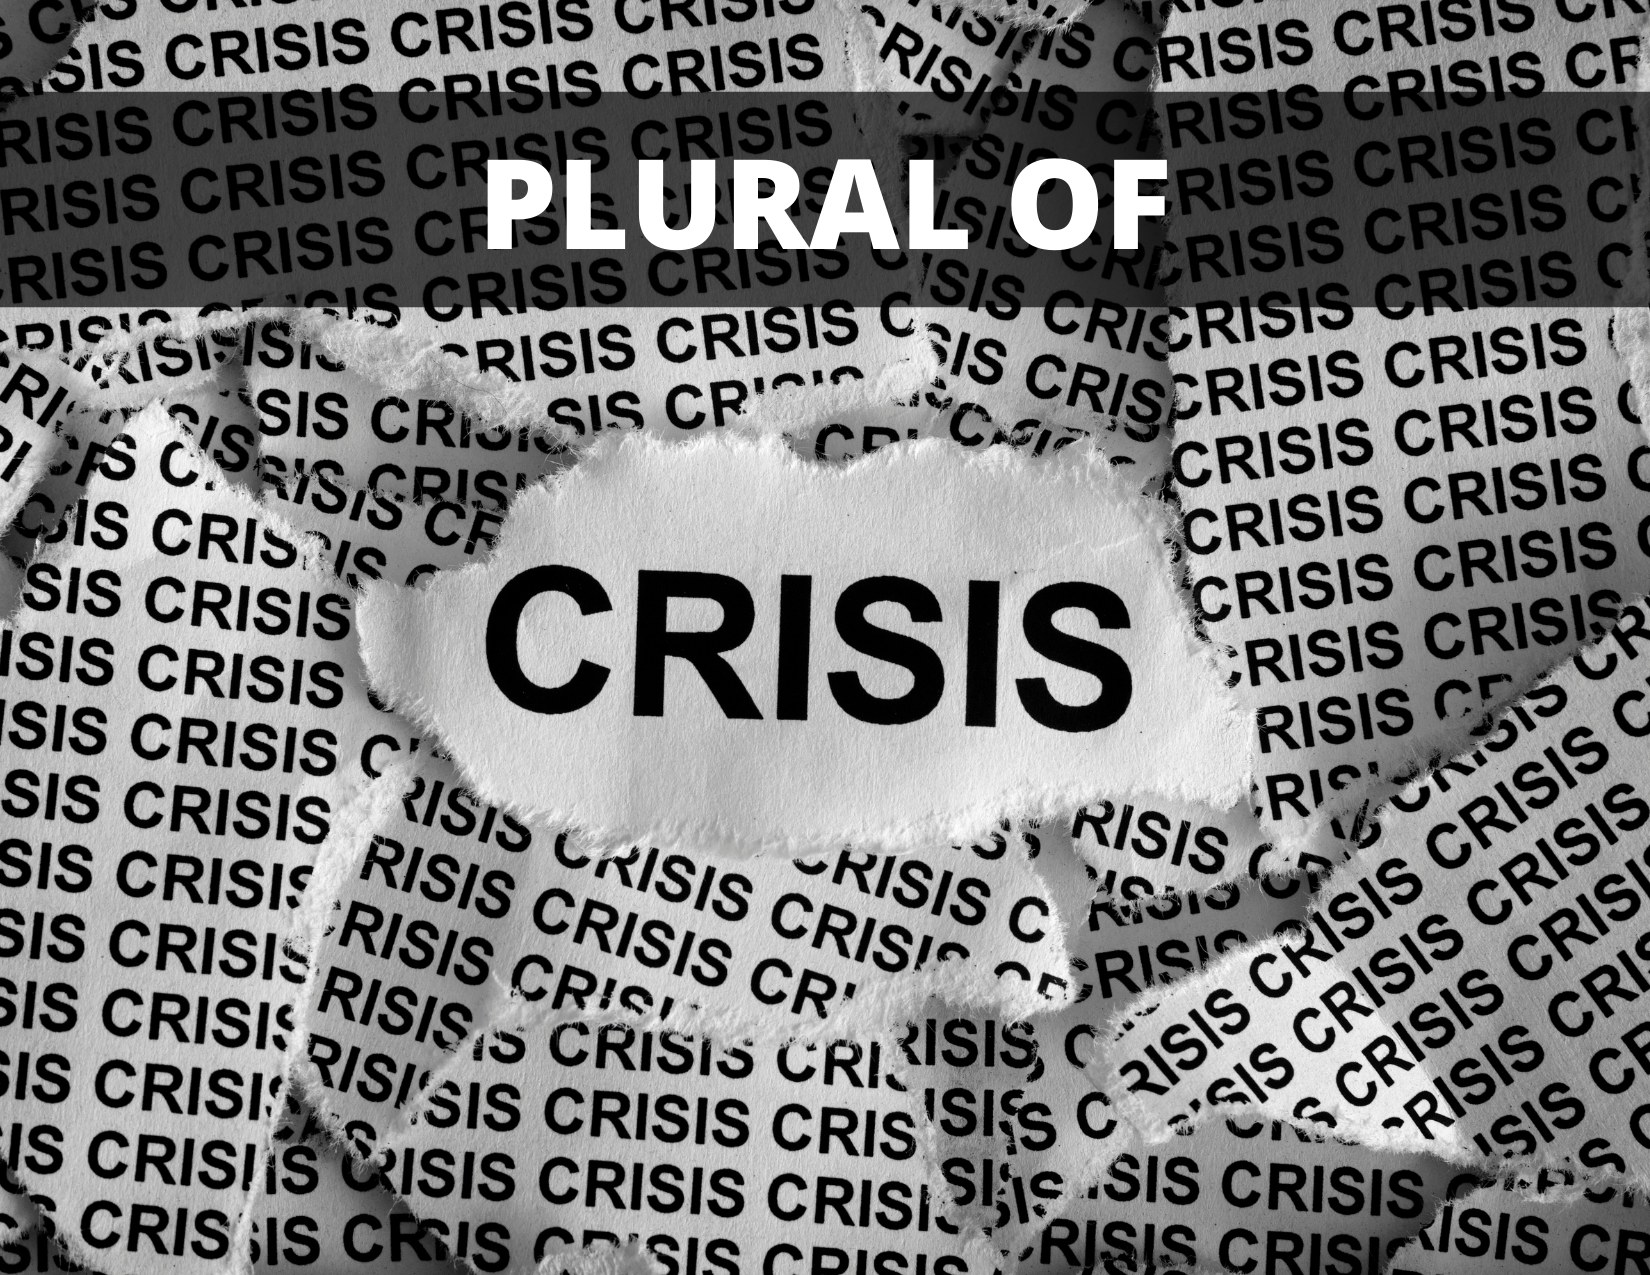 A graphic showing the word "crisis" written multiple times with the words "plural of" above